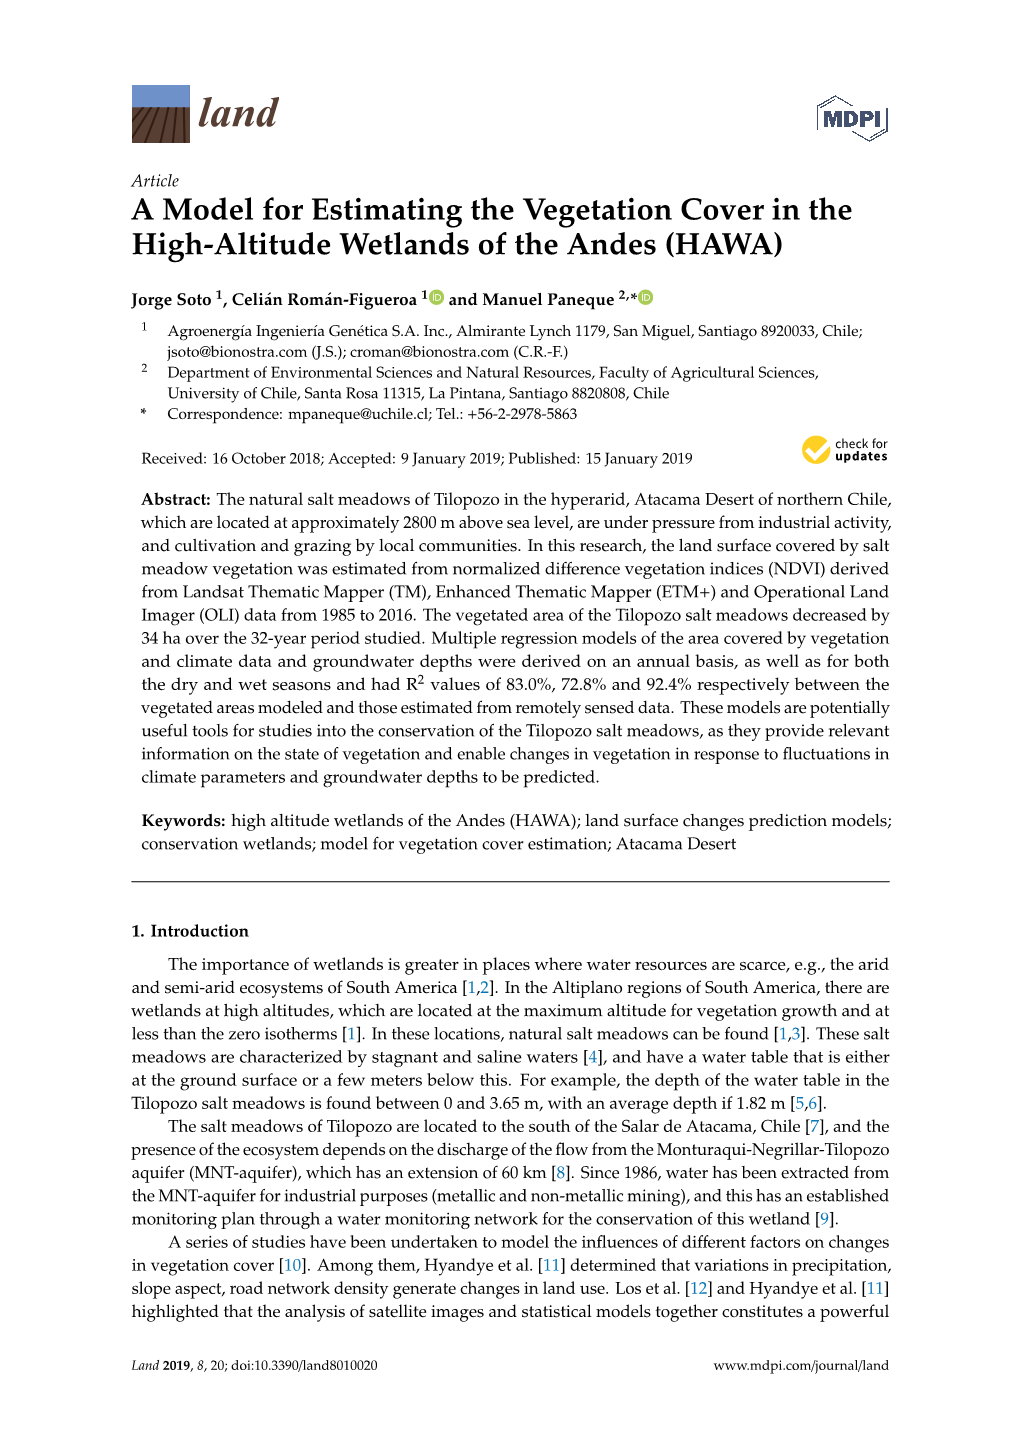 A Model for Estimating the Vegetation Cover in the High-Altitude Wetlands of the Andes (HAWA)